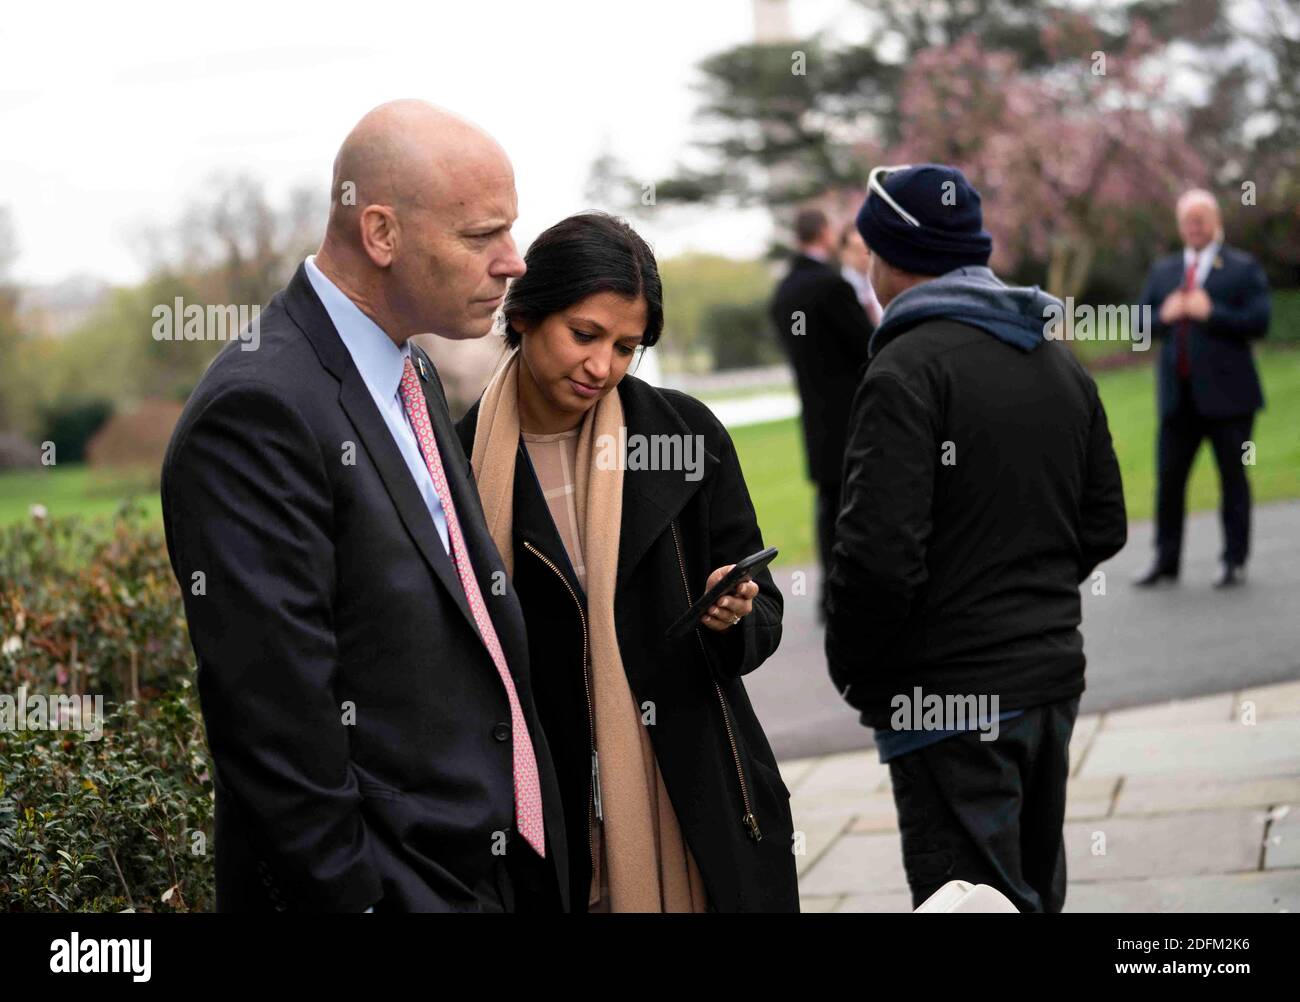 File photo dated March, 24, 2020 of Marc Short, Chief of Staff for Vice President Mike Pence, left, talks with Katie Miller, Vice President Mike Pence's press secretary, in the Rose Garden of the White House. At least five people in Vice President Mike Pence's orbit have tested positive for coronavirus in recent days, including chief of staff Marc Short. Vice President Mike Pence and second lady Karen Pence each tested negative for coronavirus on Sunday, a White House official said. Photo by Doug Mills/Pool/ABACAPRESS.COM Stock Photo